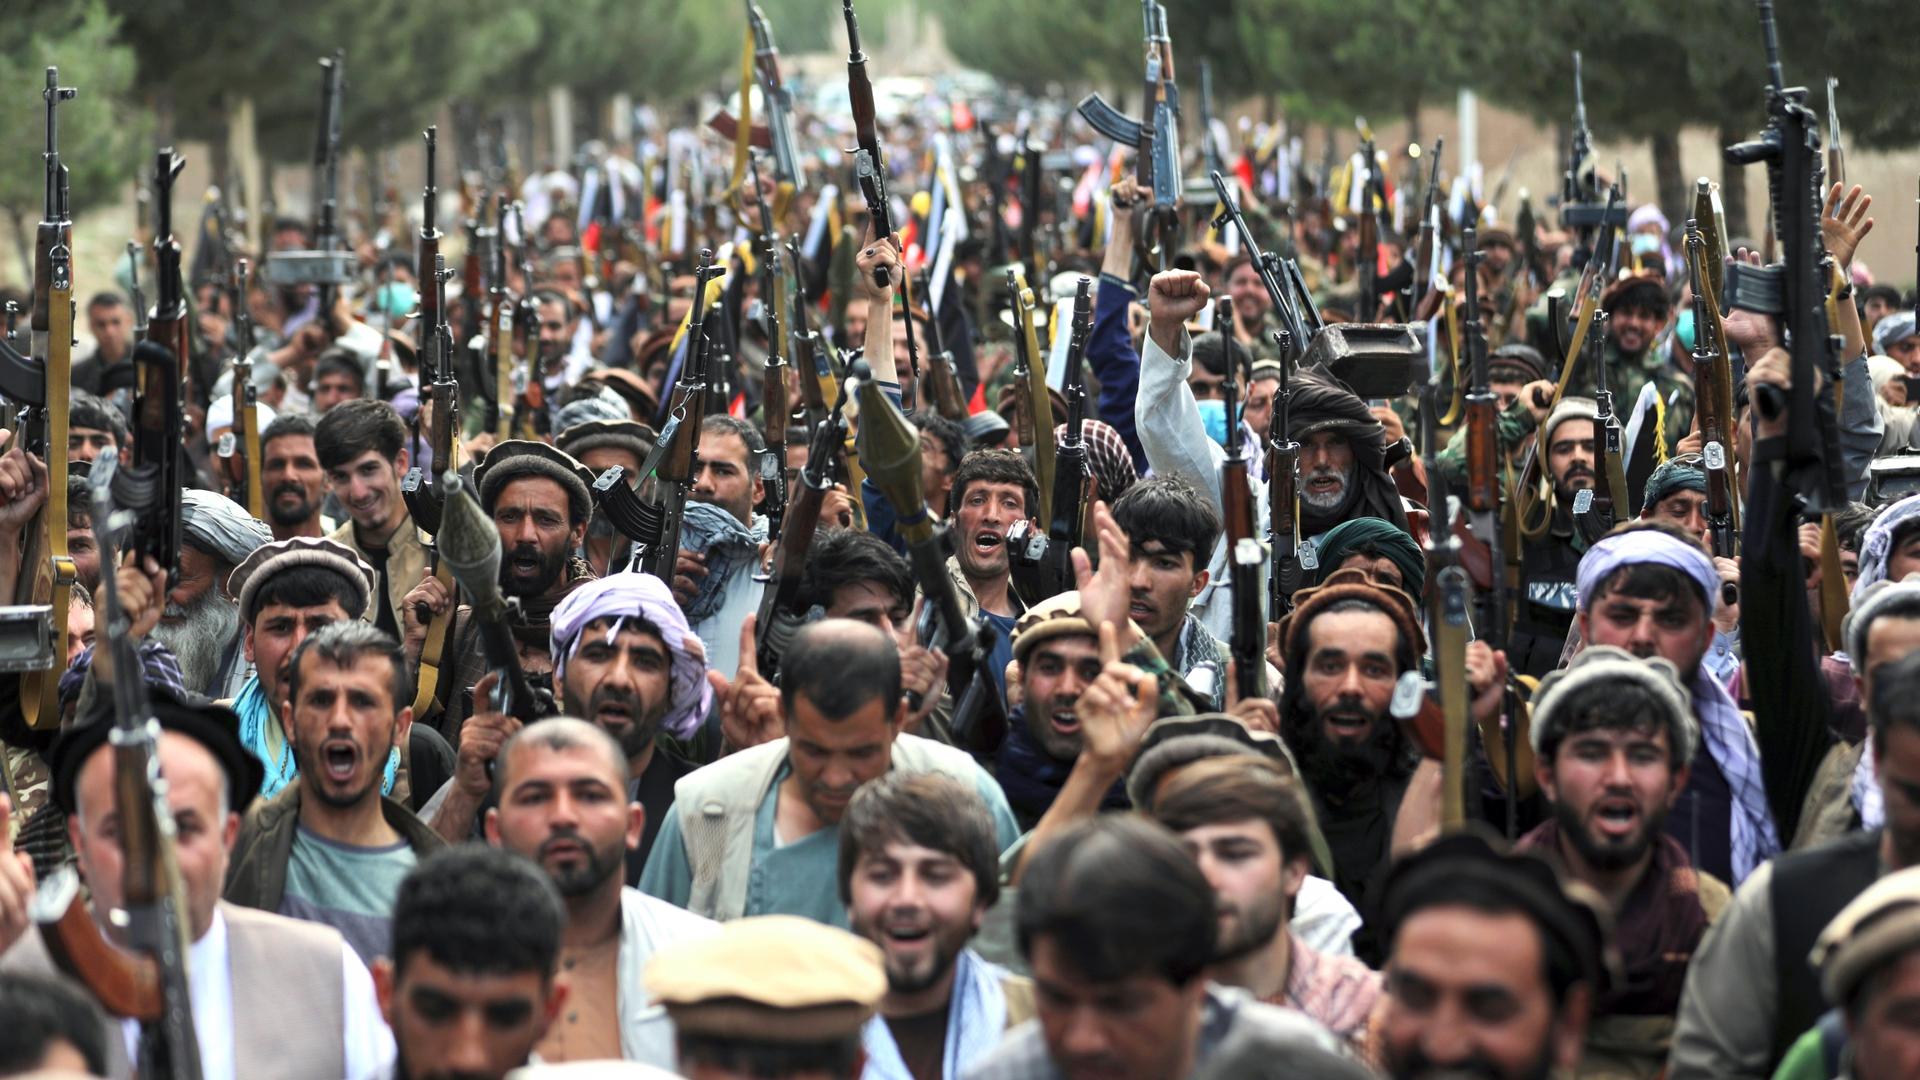 Afghan militiamen join Afghan defense and security forces during a gathering in Kabul, Afghanistan, June 23, 2021. Afghanistan's defense ministry is working with warlords to mobilize local militias across the country, most particularly in the north, to tr